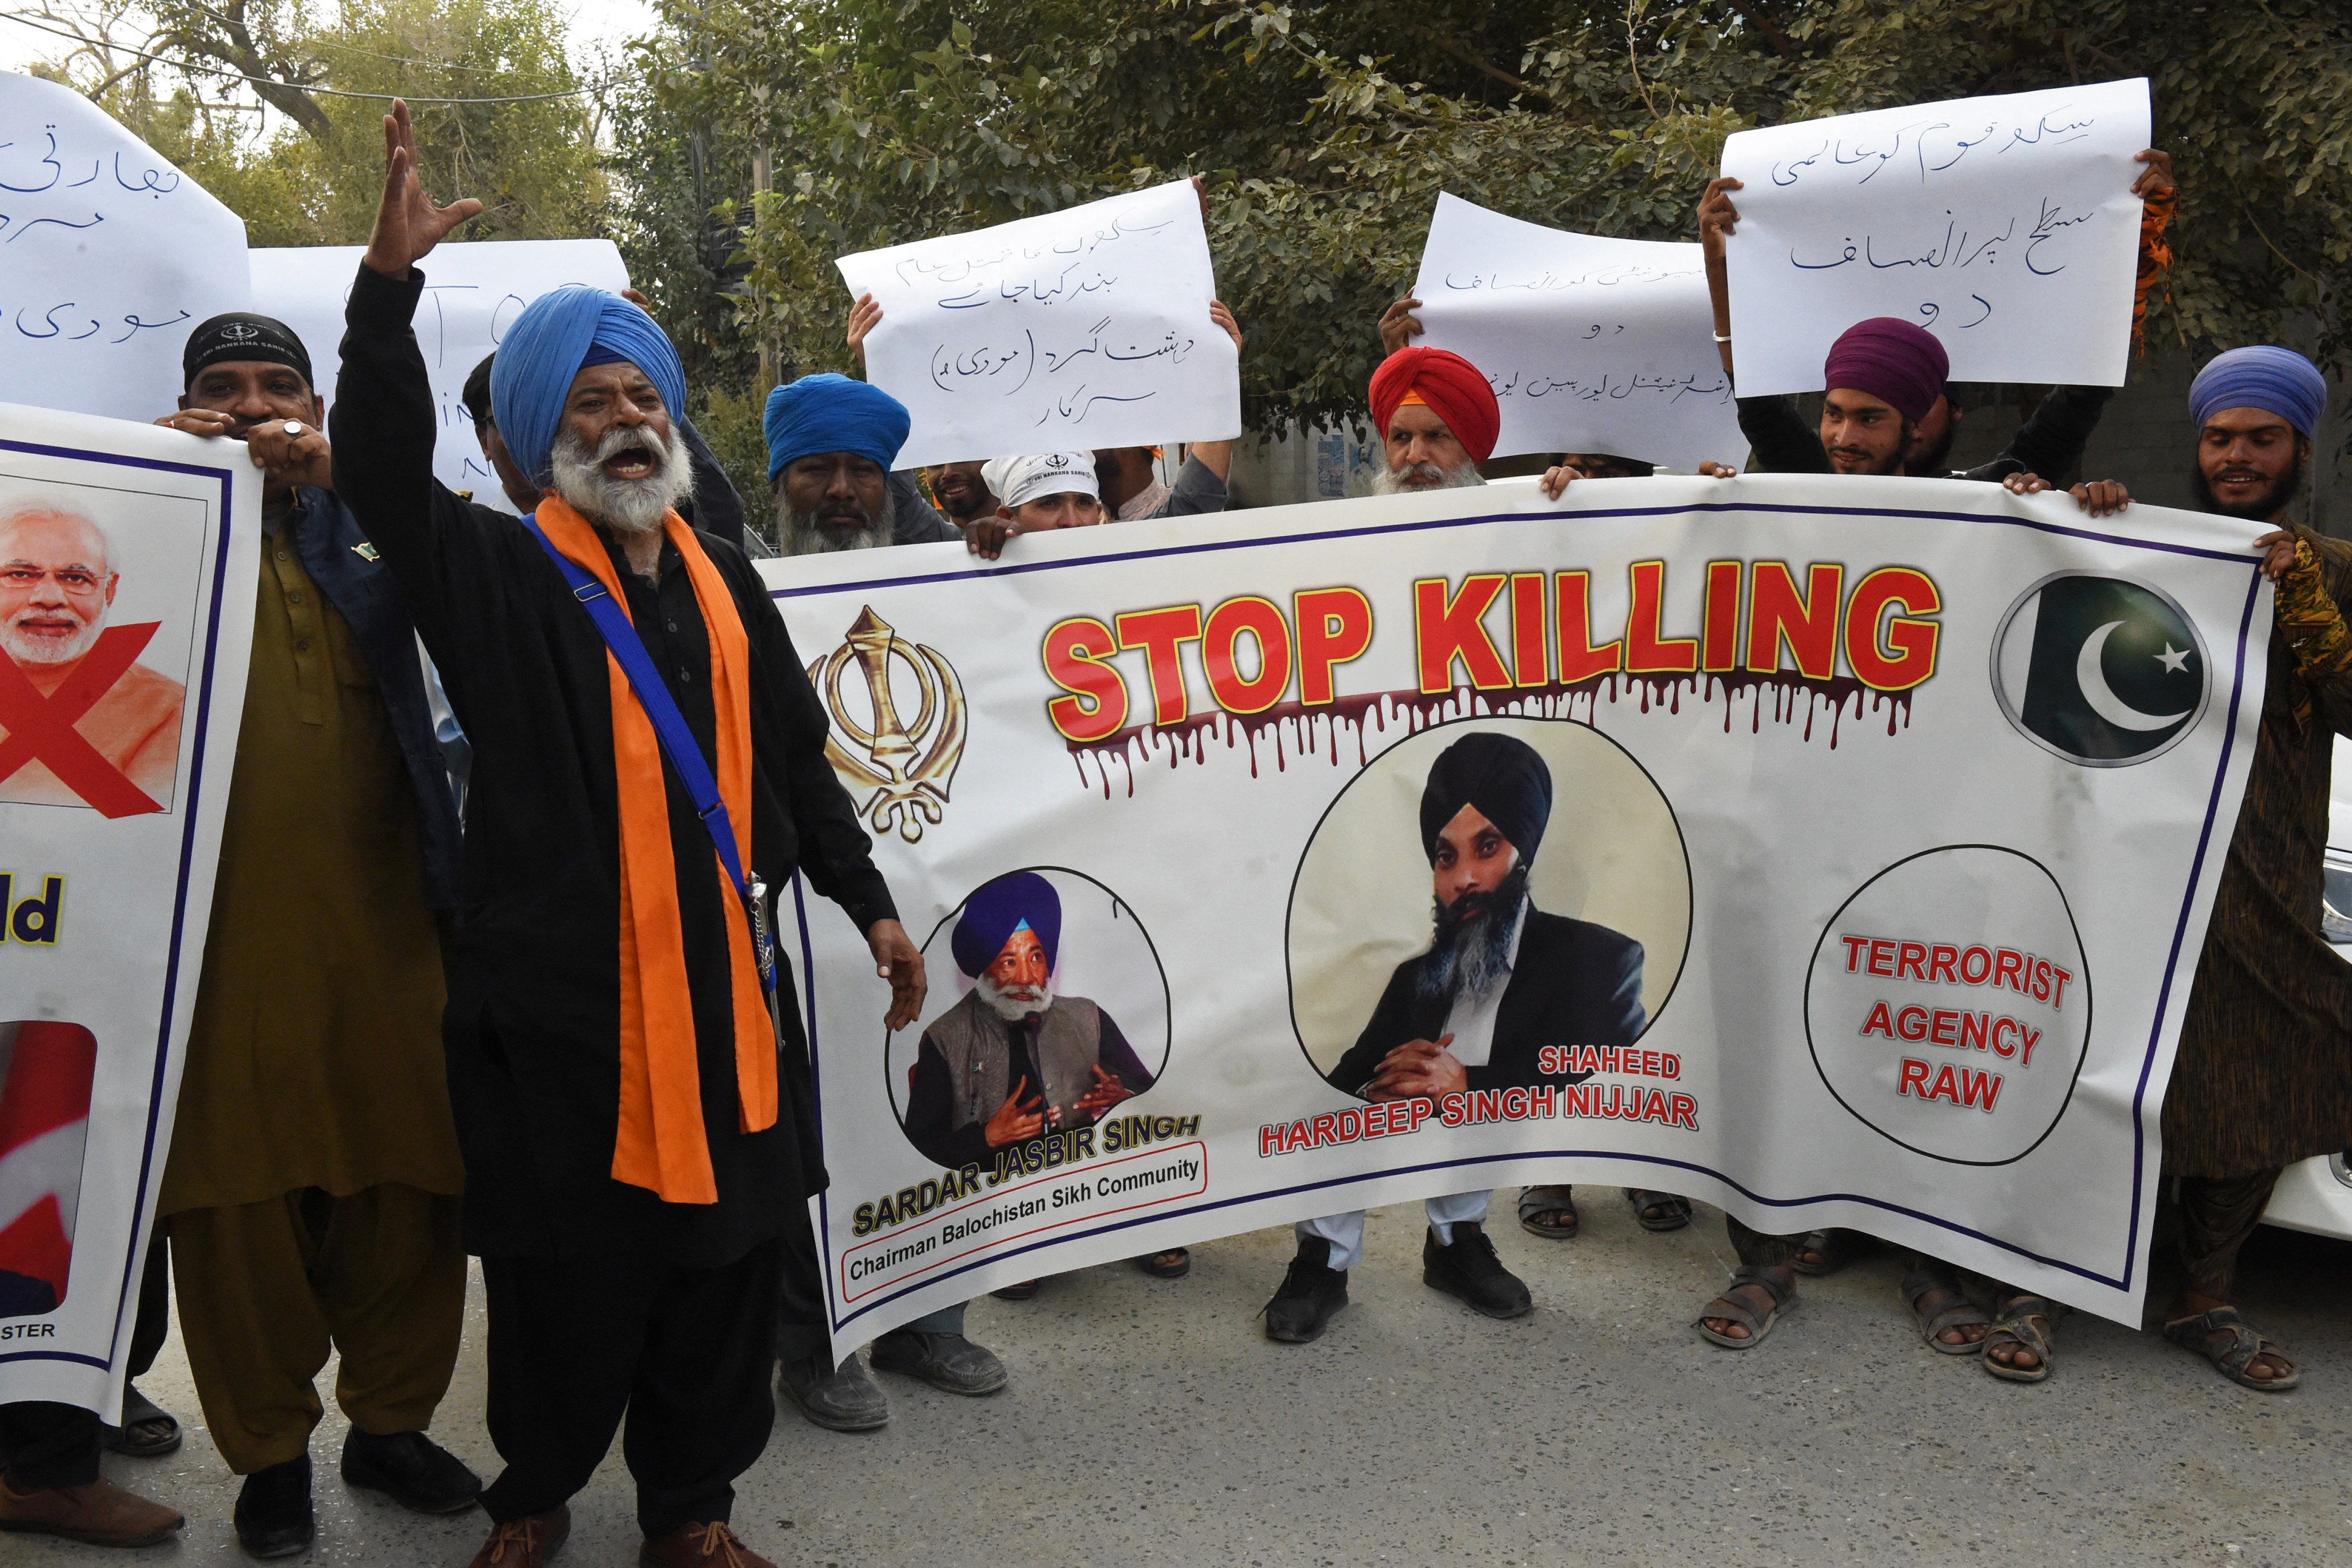 Members of Pakistan’s Sikh community shout slogans as they hold banners during a protest to condemn the killing of a Sikh separatist, Hardeep Singh Nijjar, in Canada. Ottawa concluded that Indian agents played a role in the June killing near Vancouver of a Sikh separatist, Hardeep Singh Nijjar. Photo: AFP